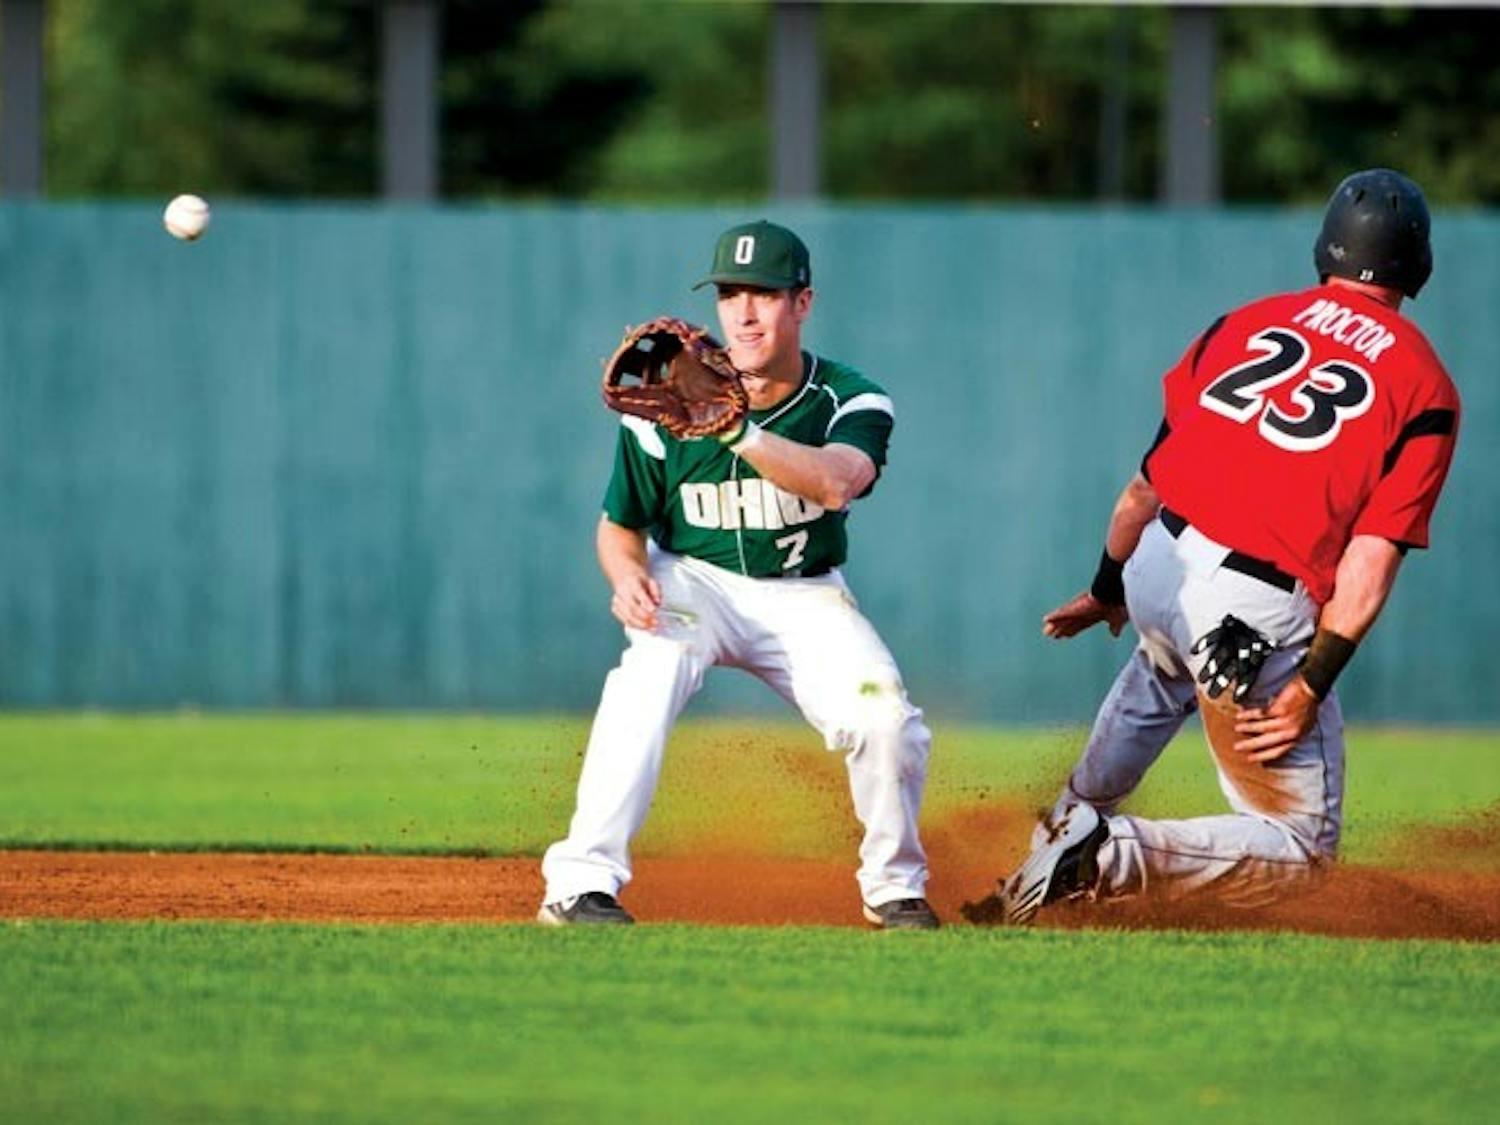 Baseball: Thunderstorm forces leading Bobcats to leave field early  